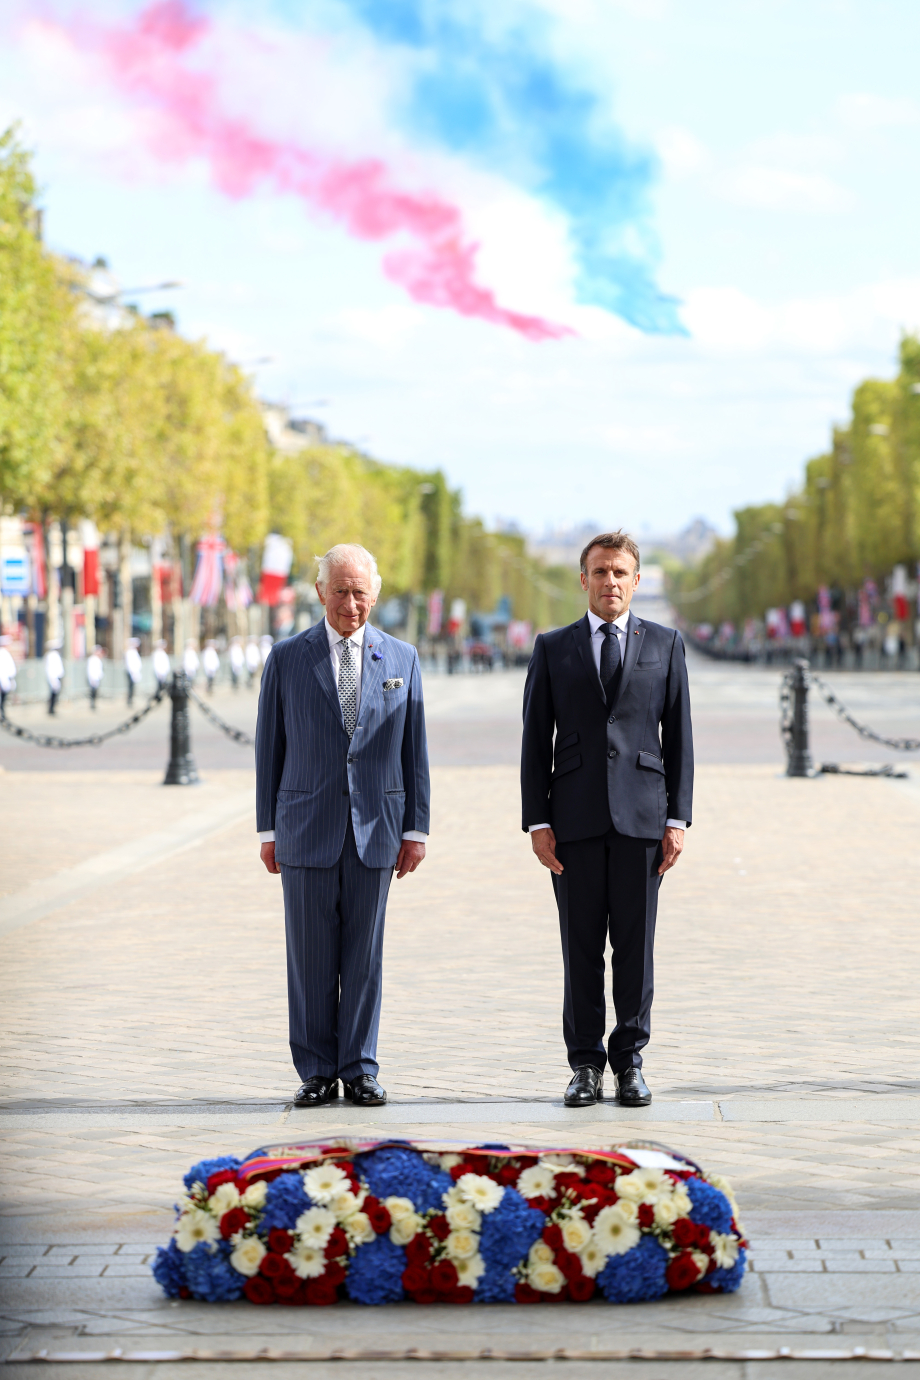 The King and President Macron at the Arc de Triomphe